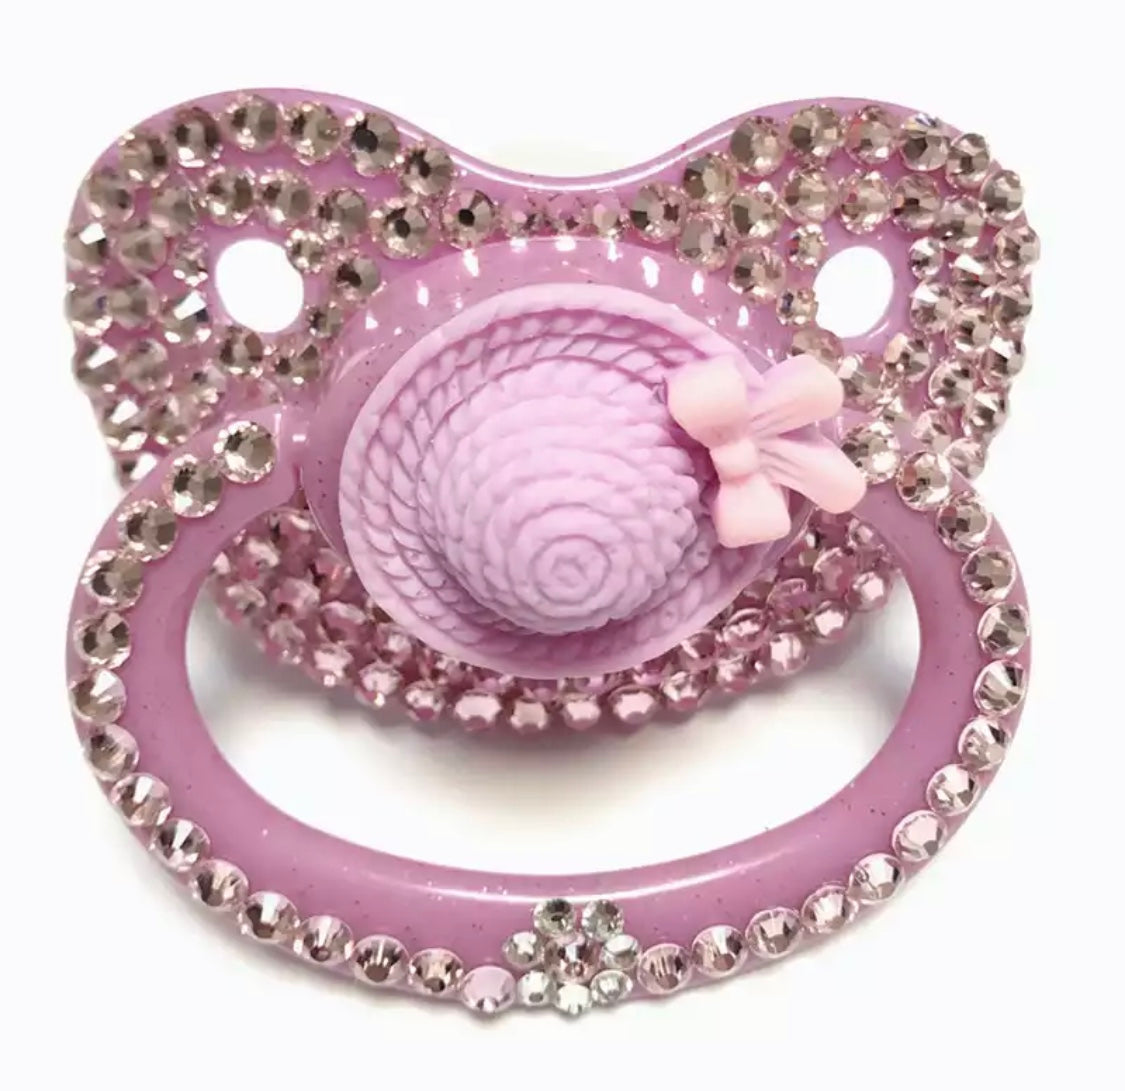 Sweetheart Adult Pacifier